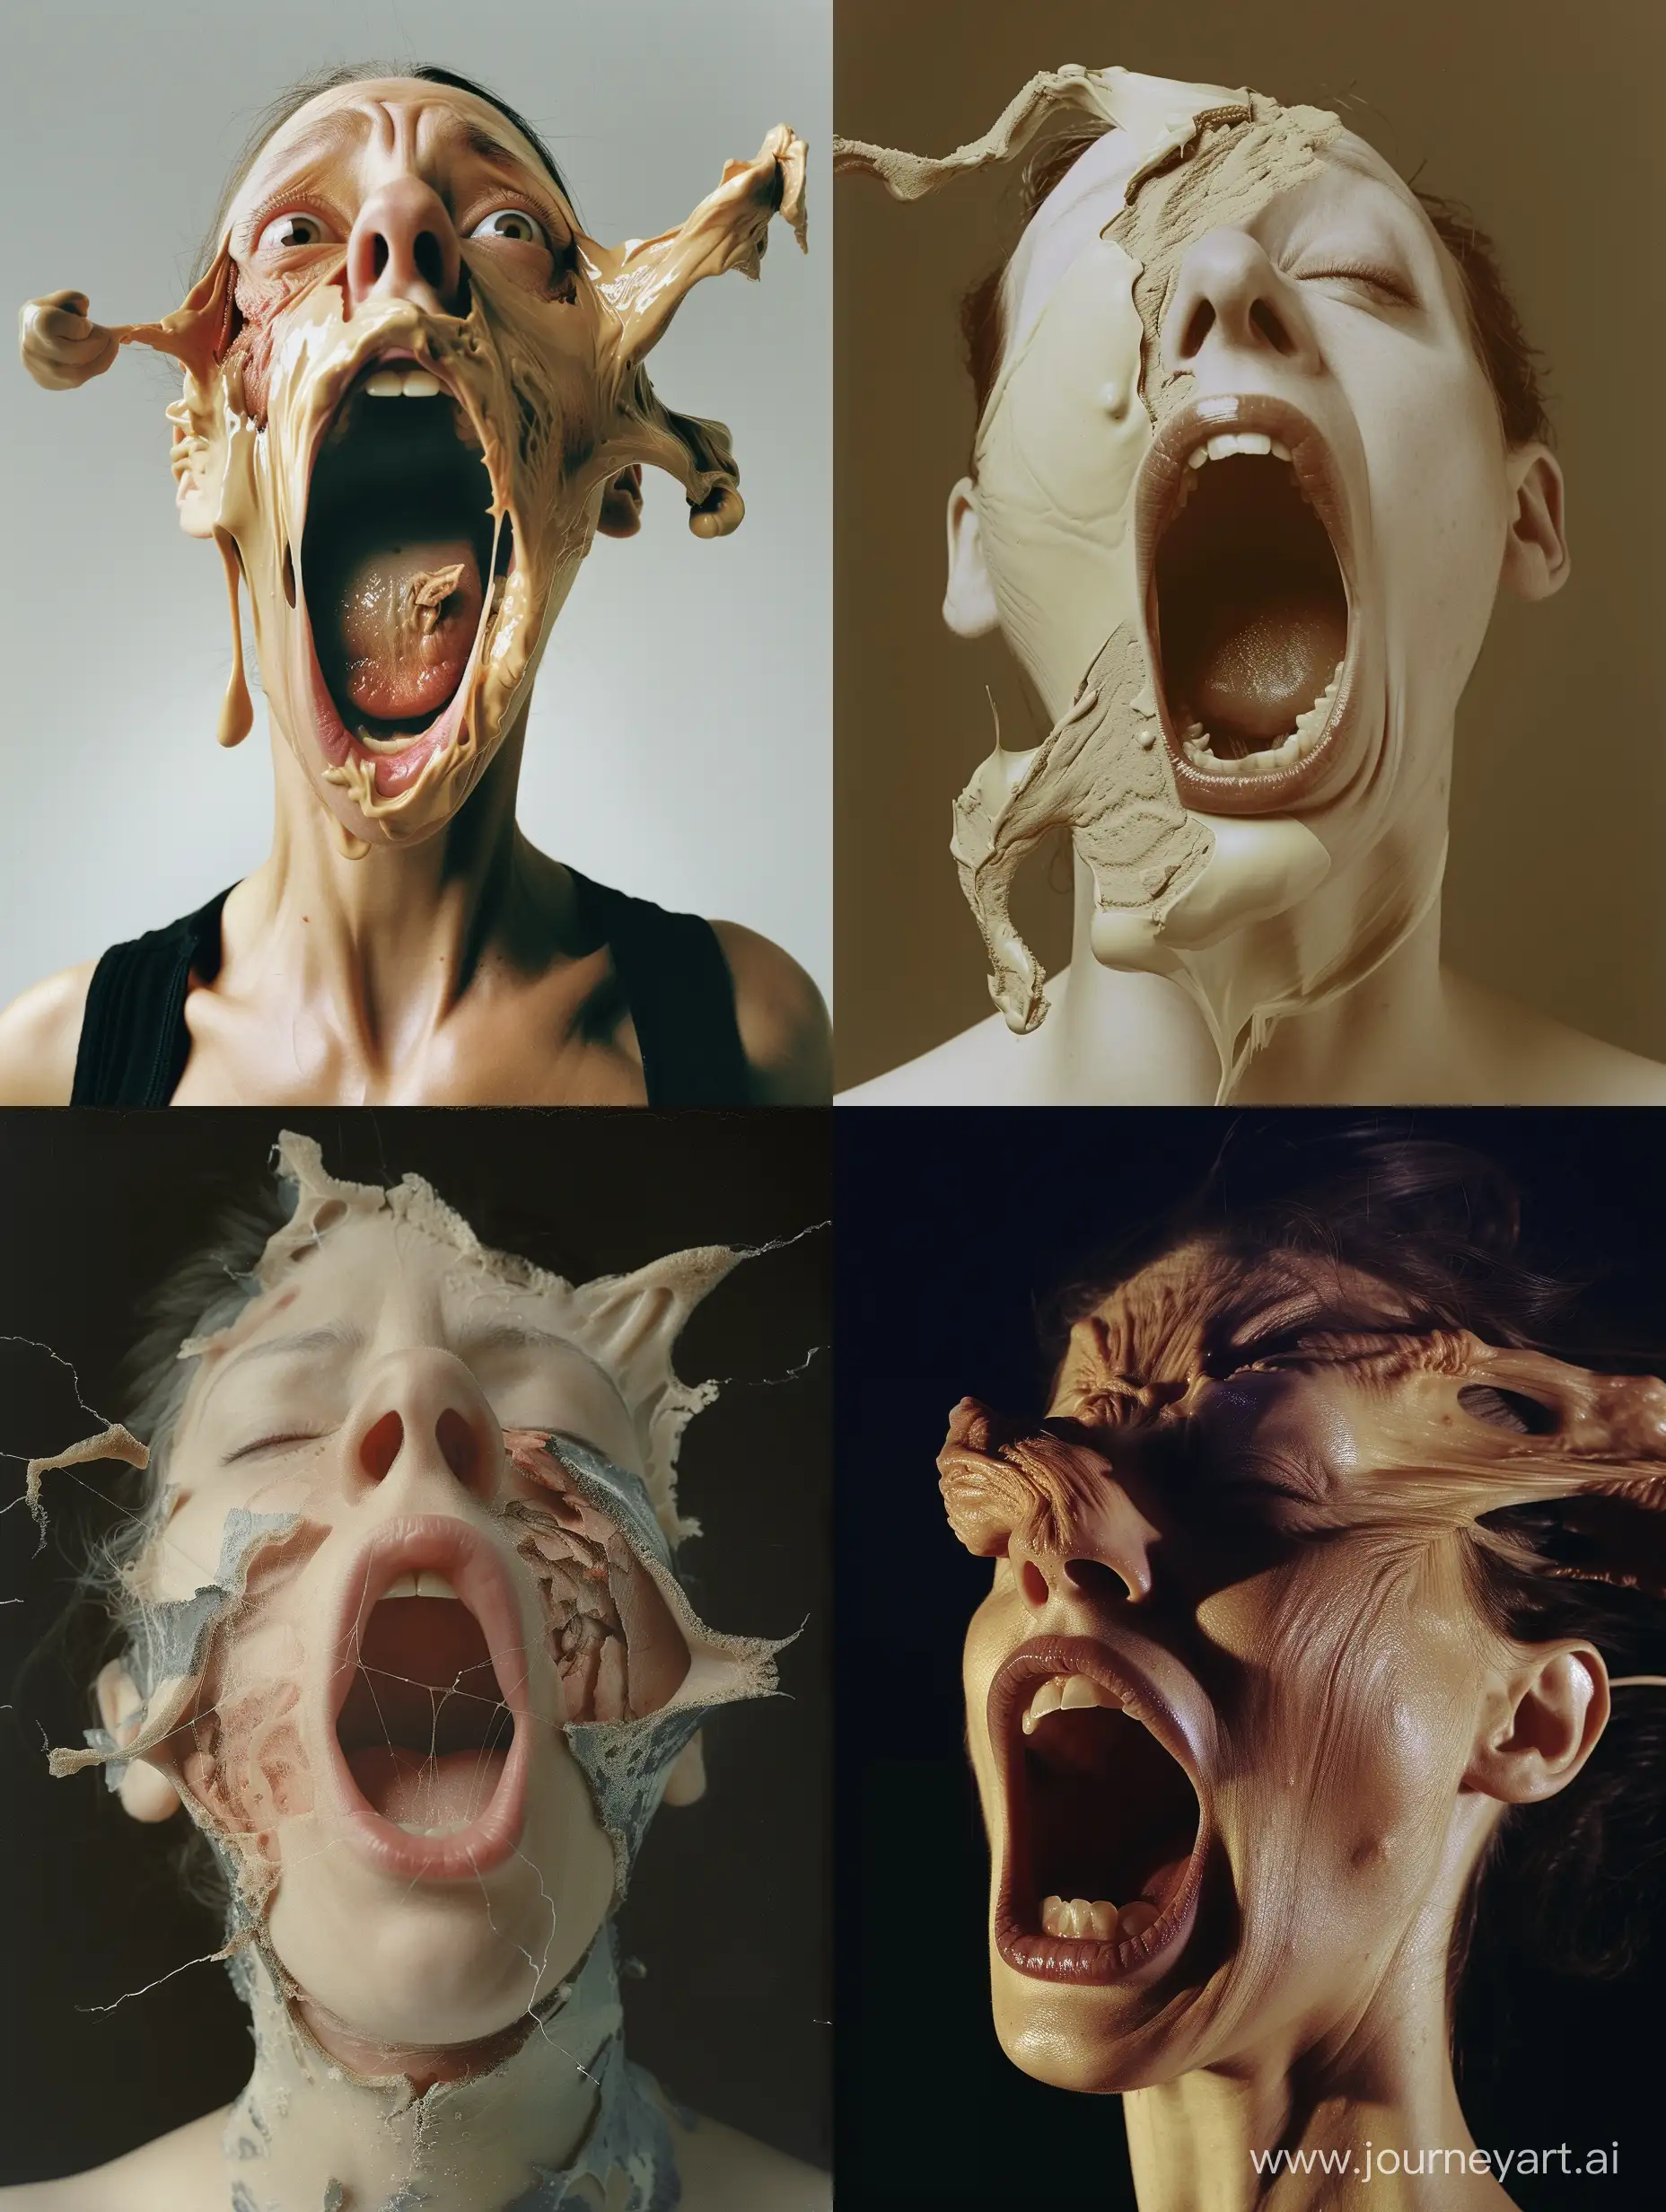 Surreal-Woman-with-Melting-Face-Captivating-Feminine-Transformation